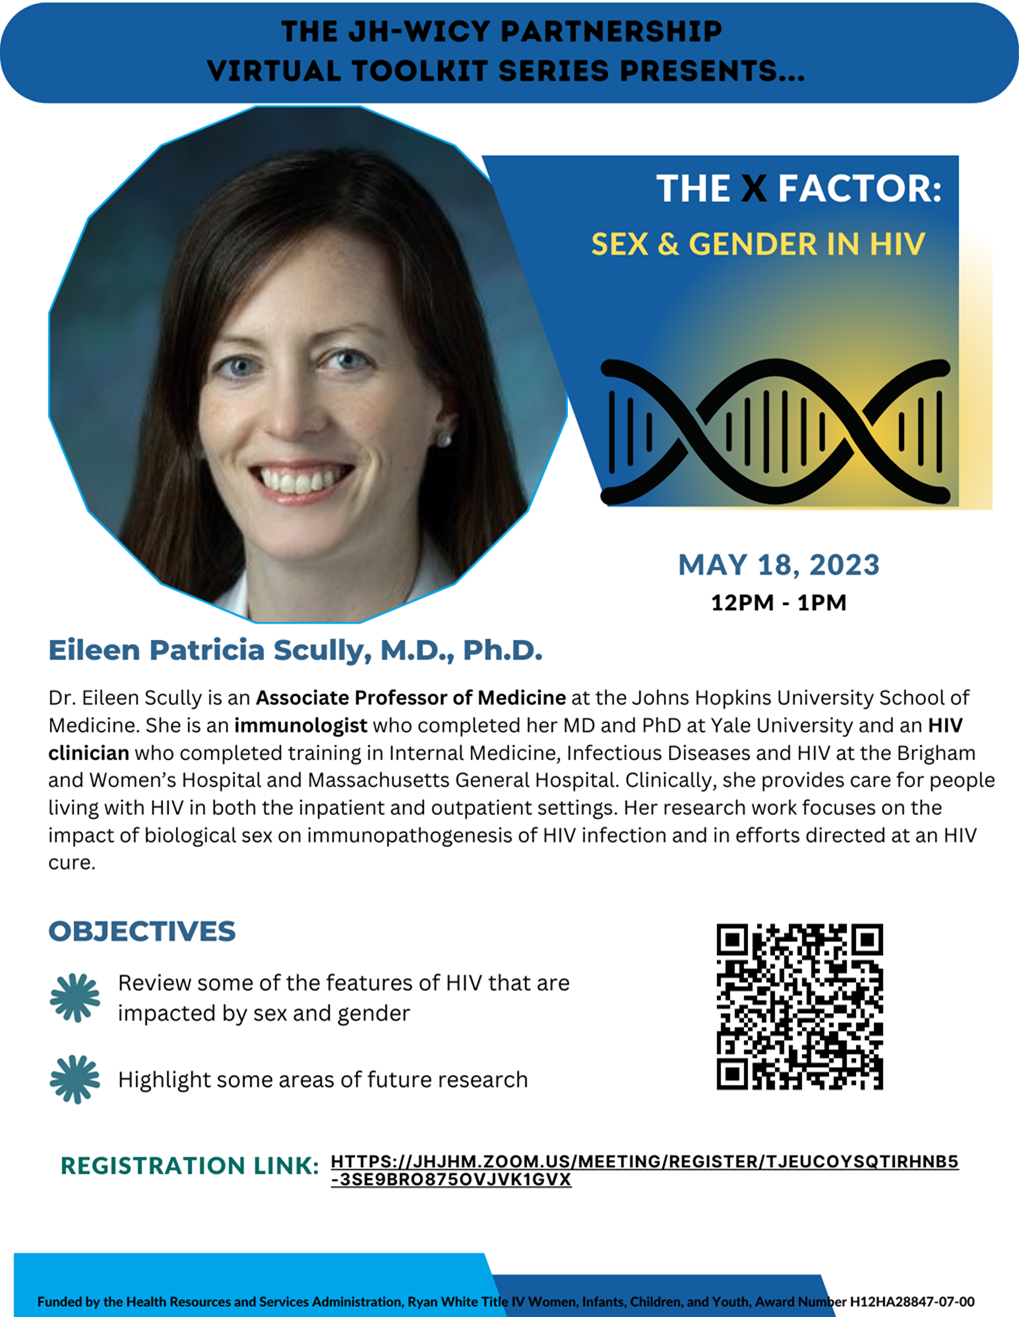 Details of event and headshot of Eileen Patricia Scully, MD, PhD.